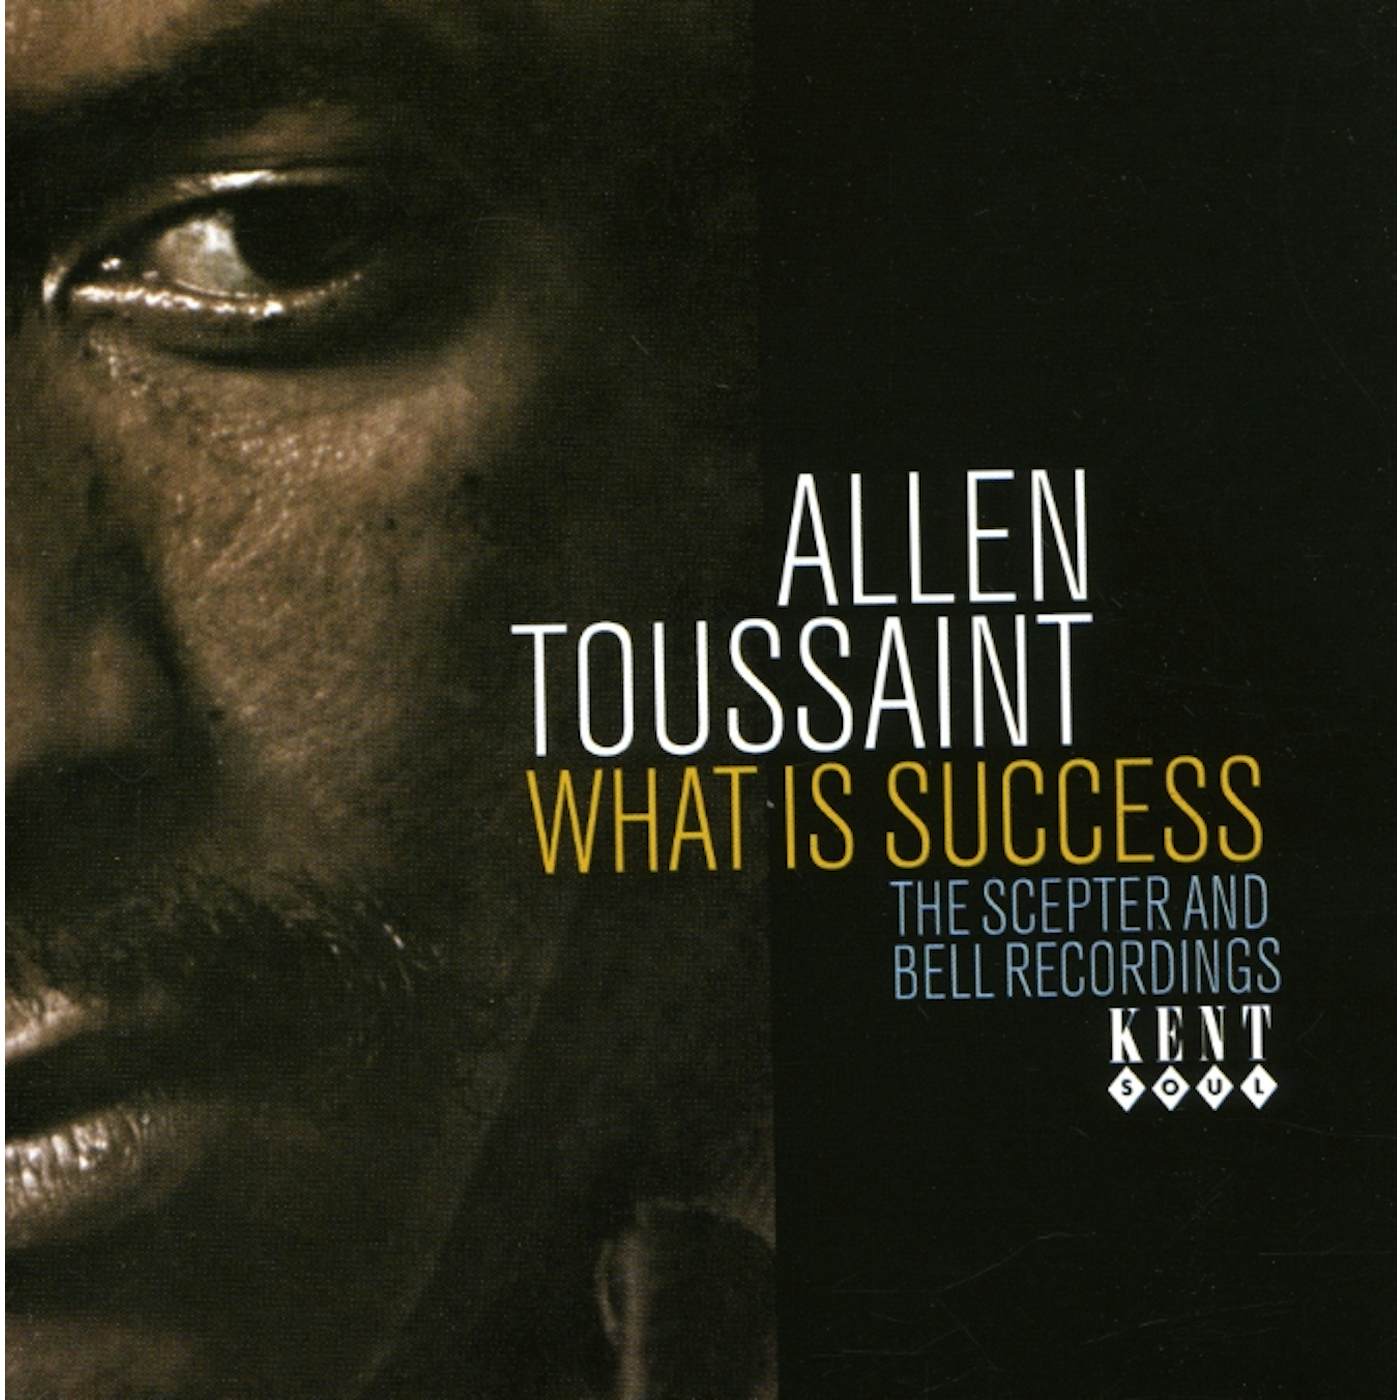 Allen Toussaint WHAT IS SUCCESS: THE SCEPTER & BELL RECORDINGS CD